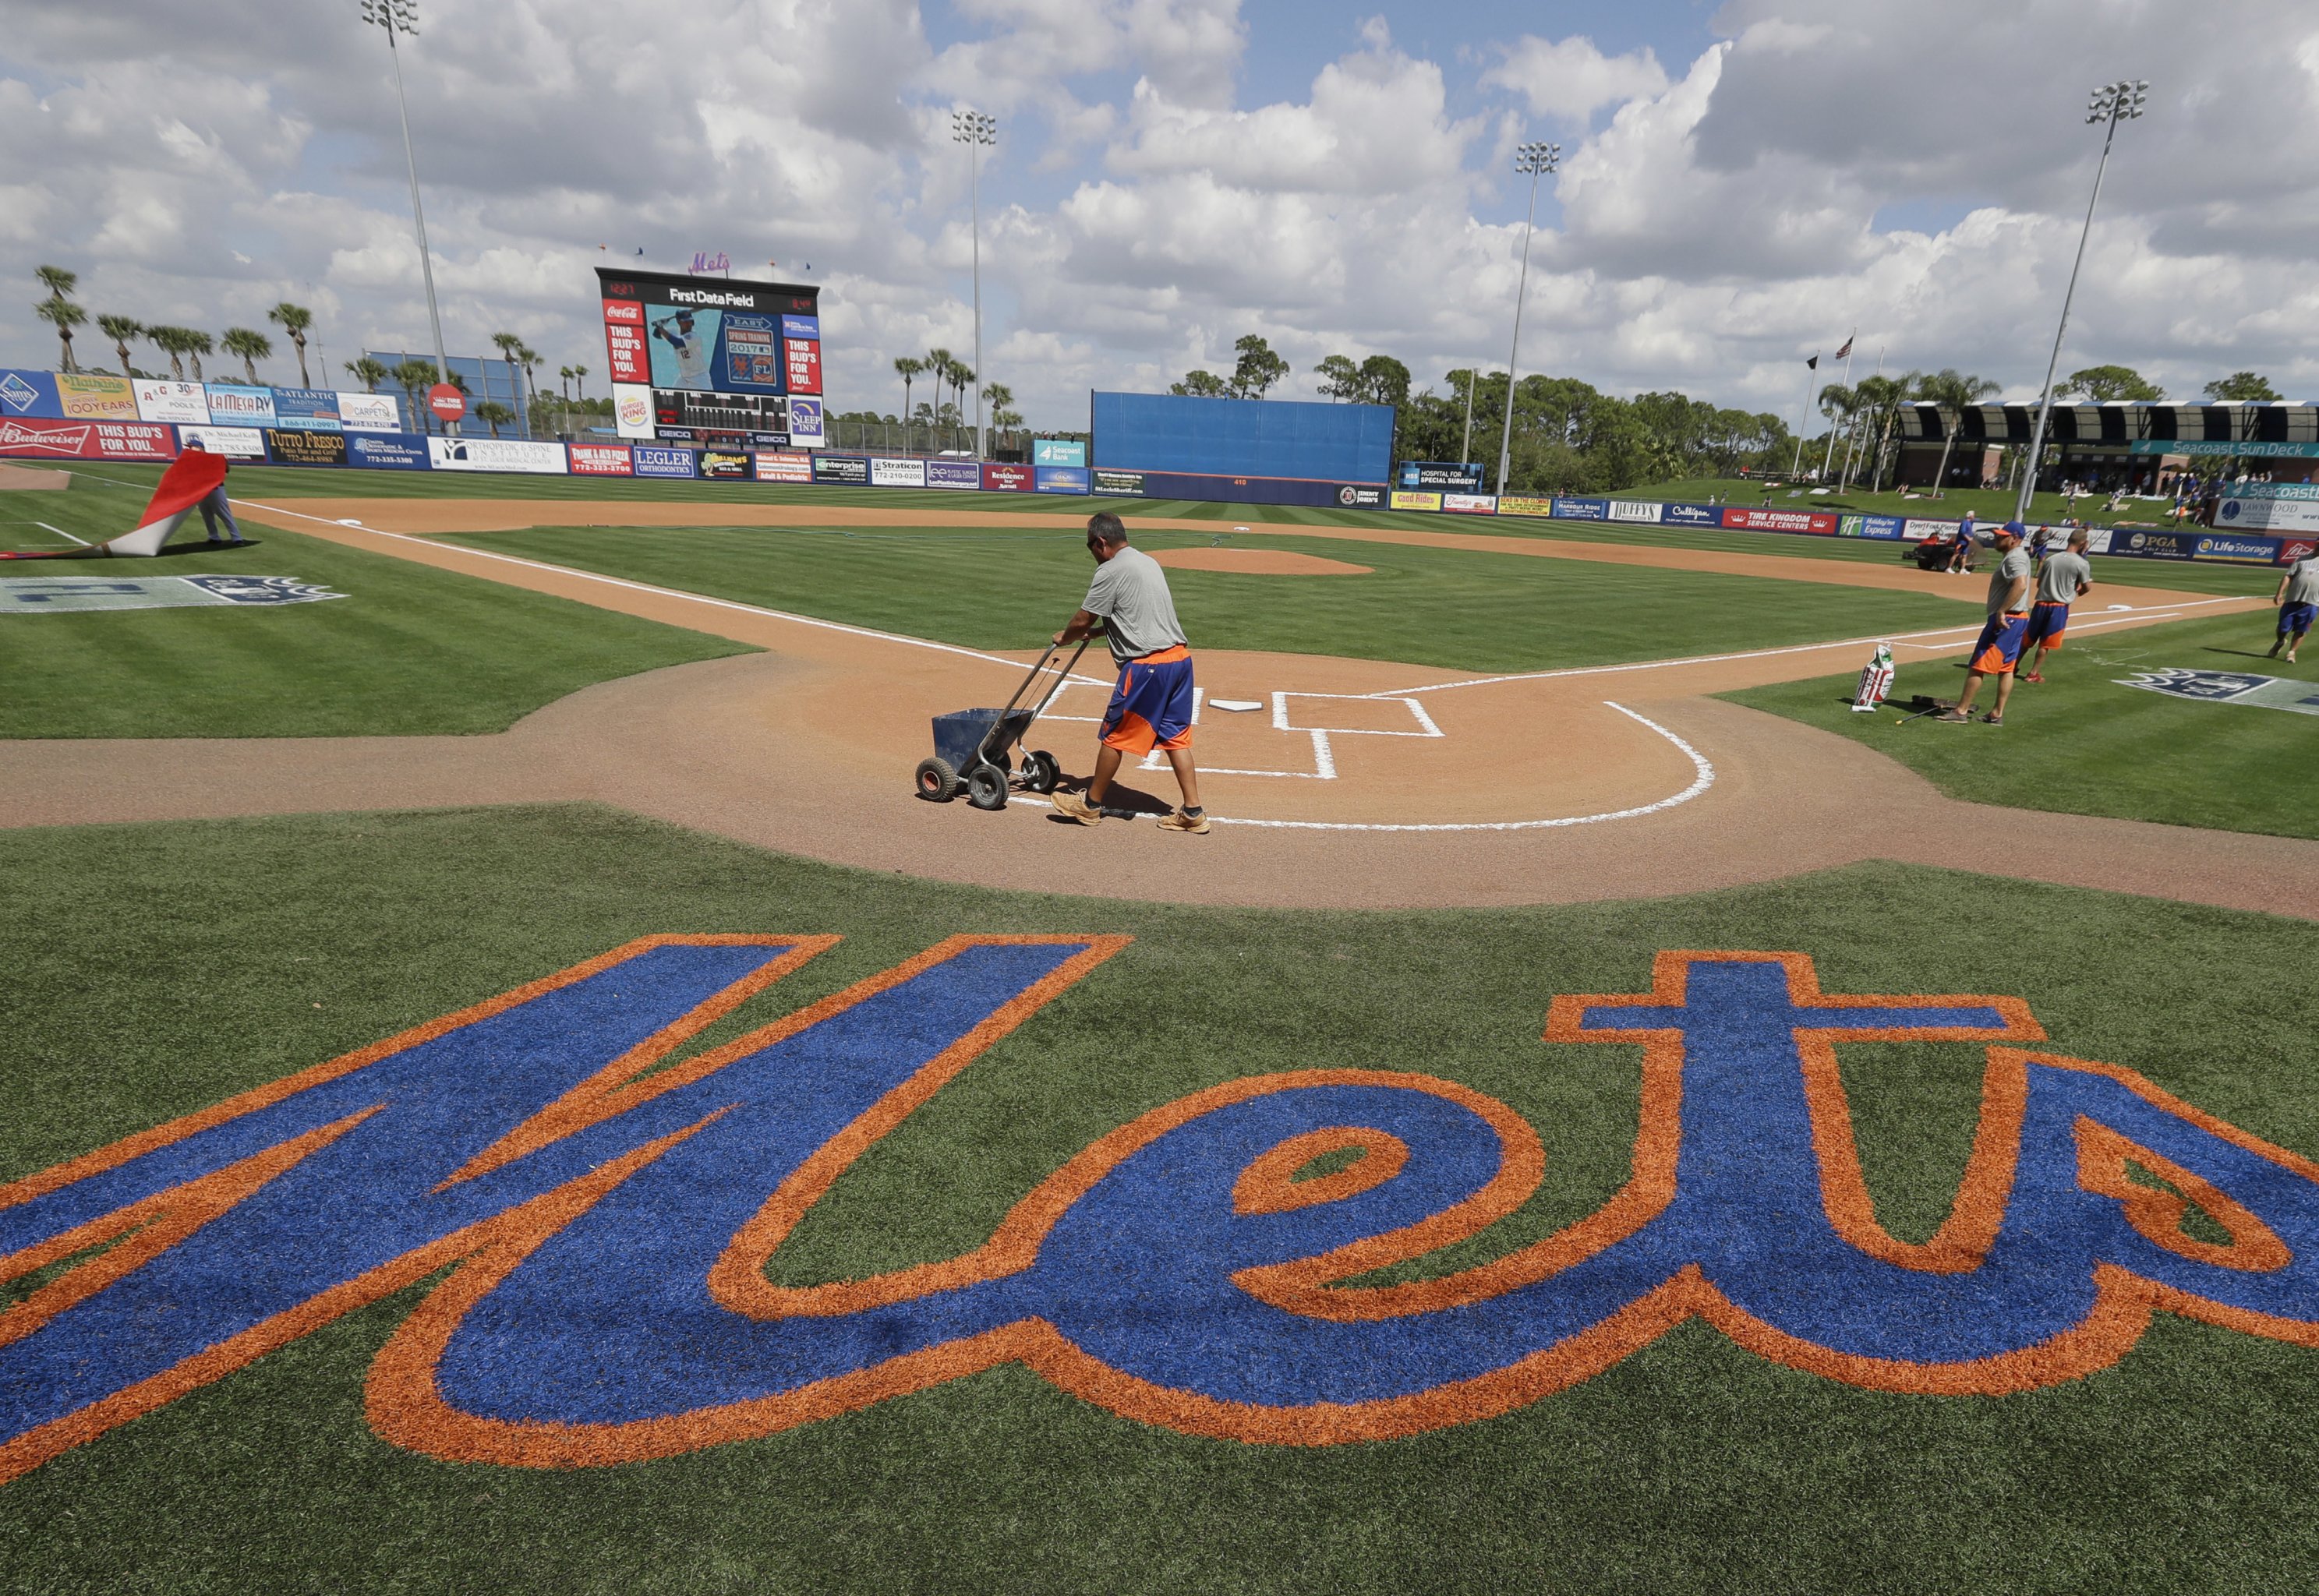 St. Lucie Mets on X: We are ONE month away from the Spring Training opener  at Clover Park! Who's ready? Tickets:    / X